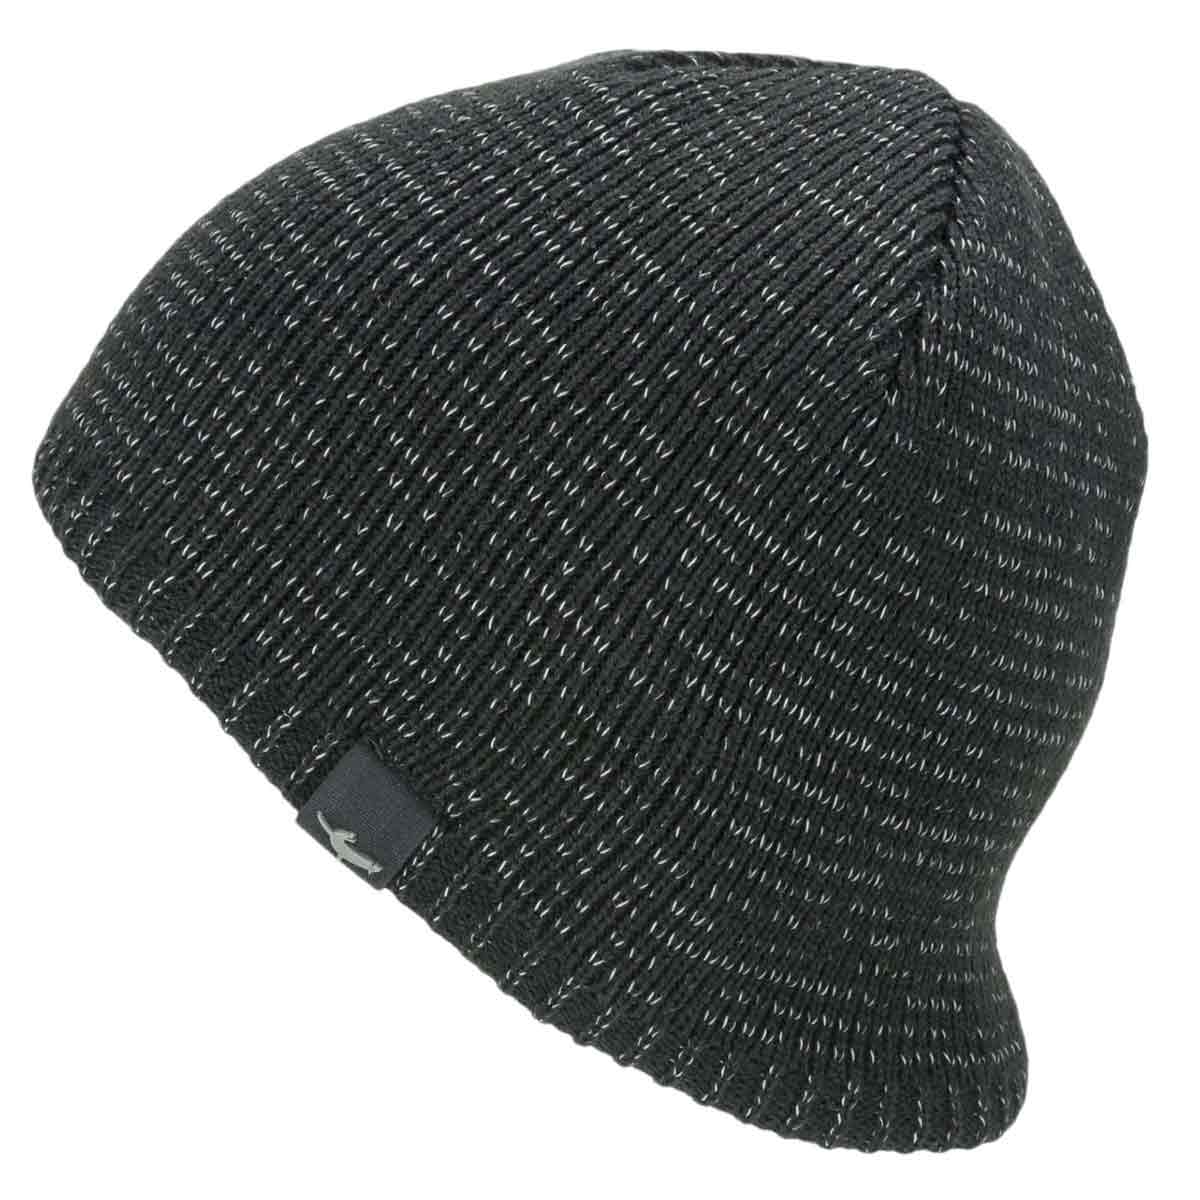 Sealskinz Waterproof Cold Weather Reflective Beanie Hat - John Bull Clothing